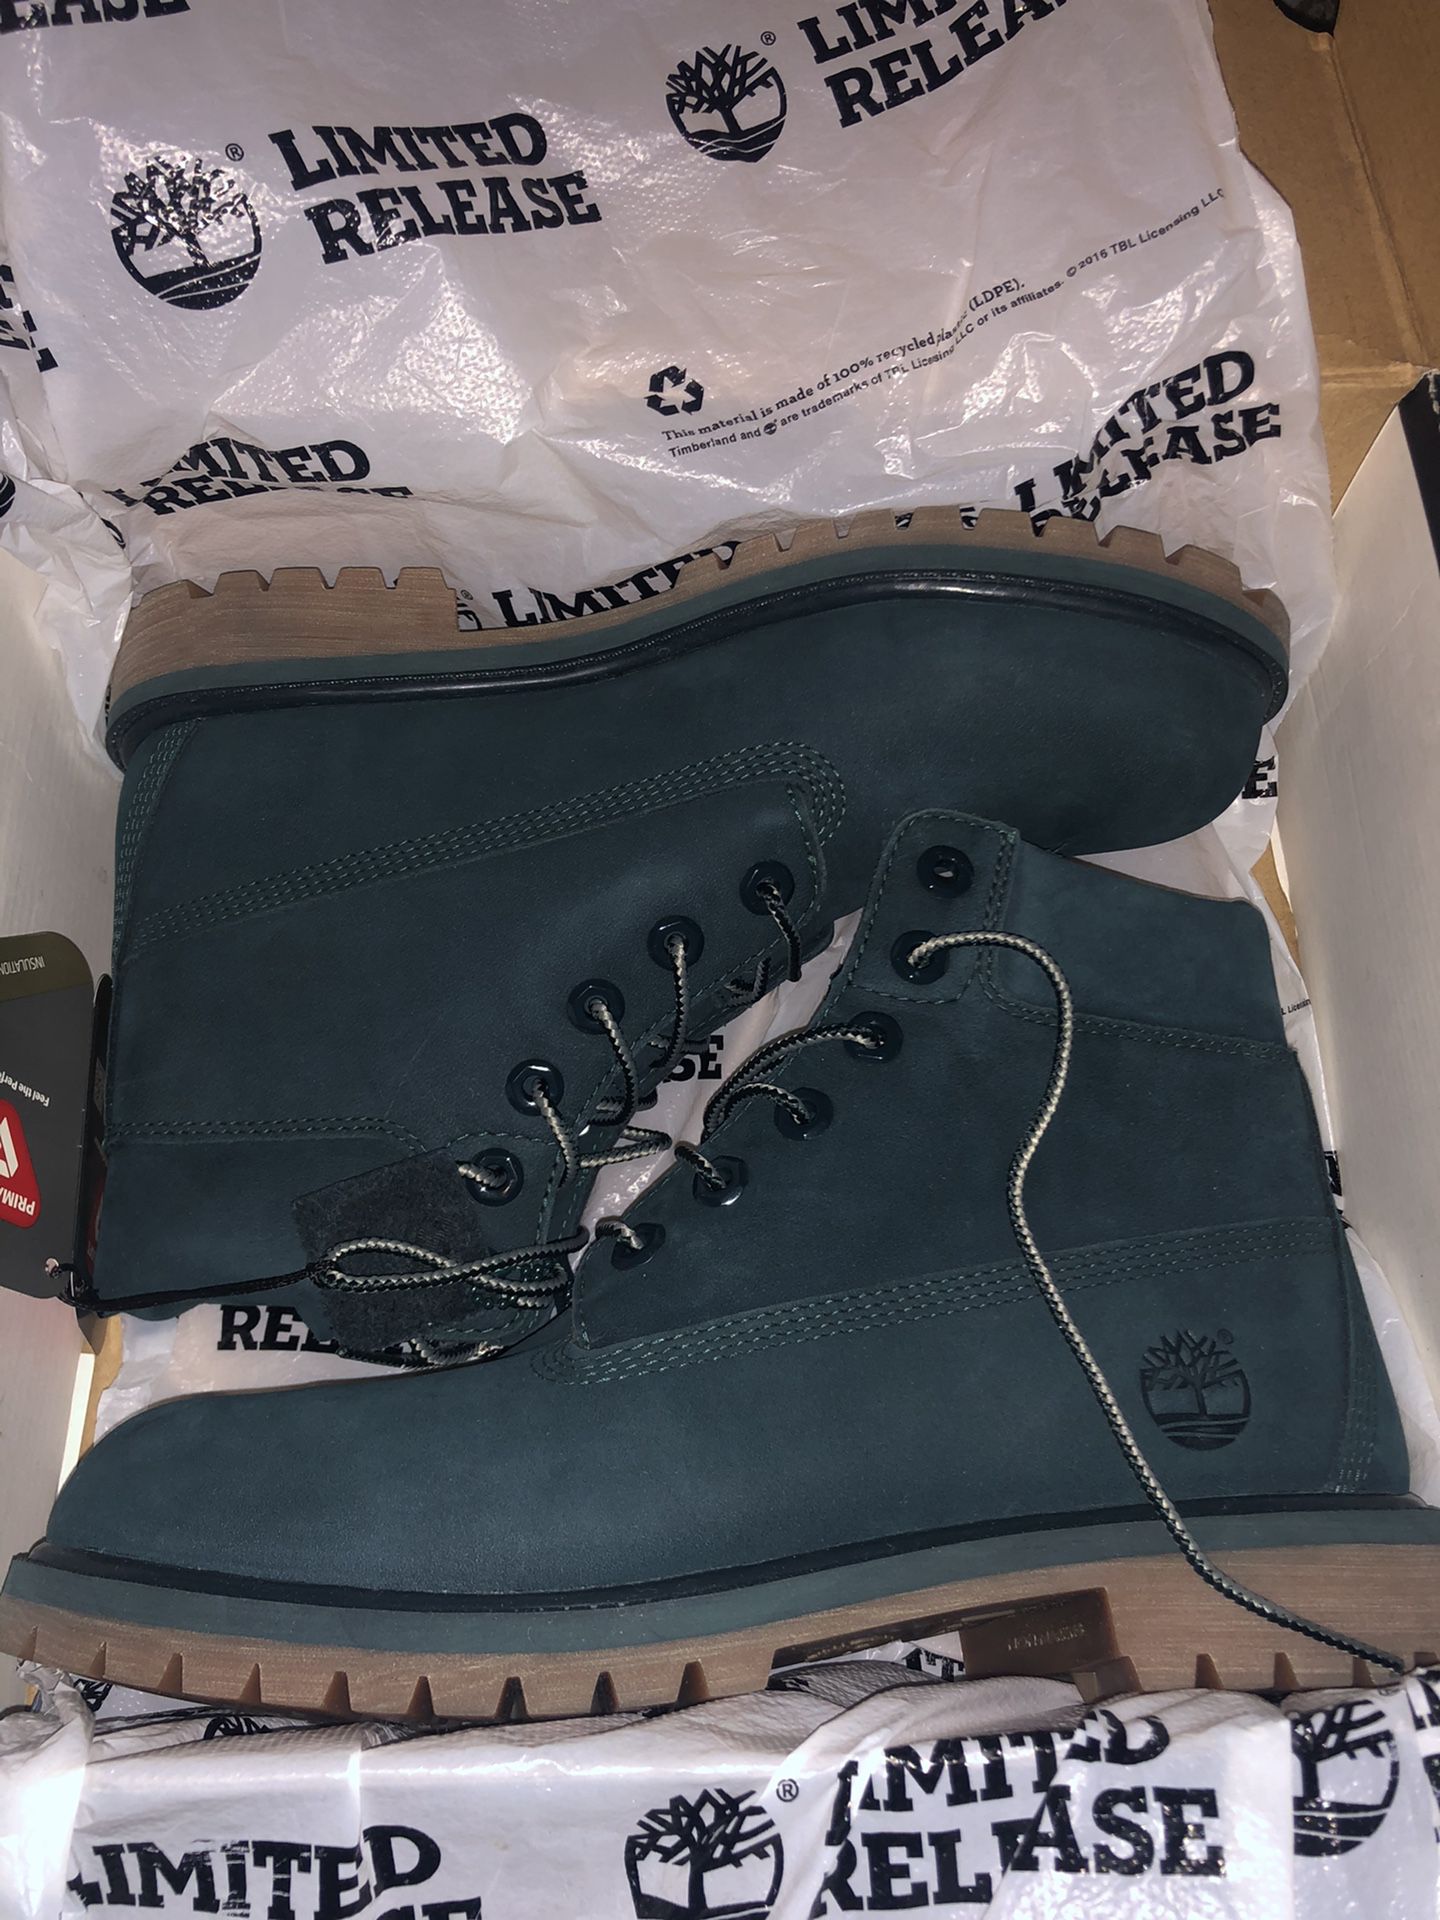 Timberlands dark green 6.5 size perfect condition never worn $25